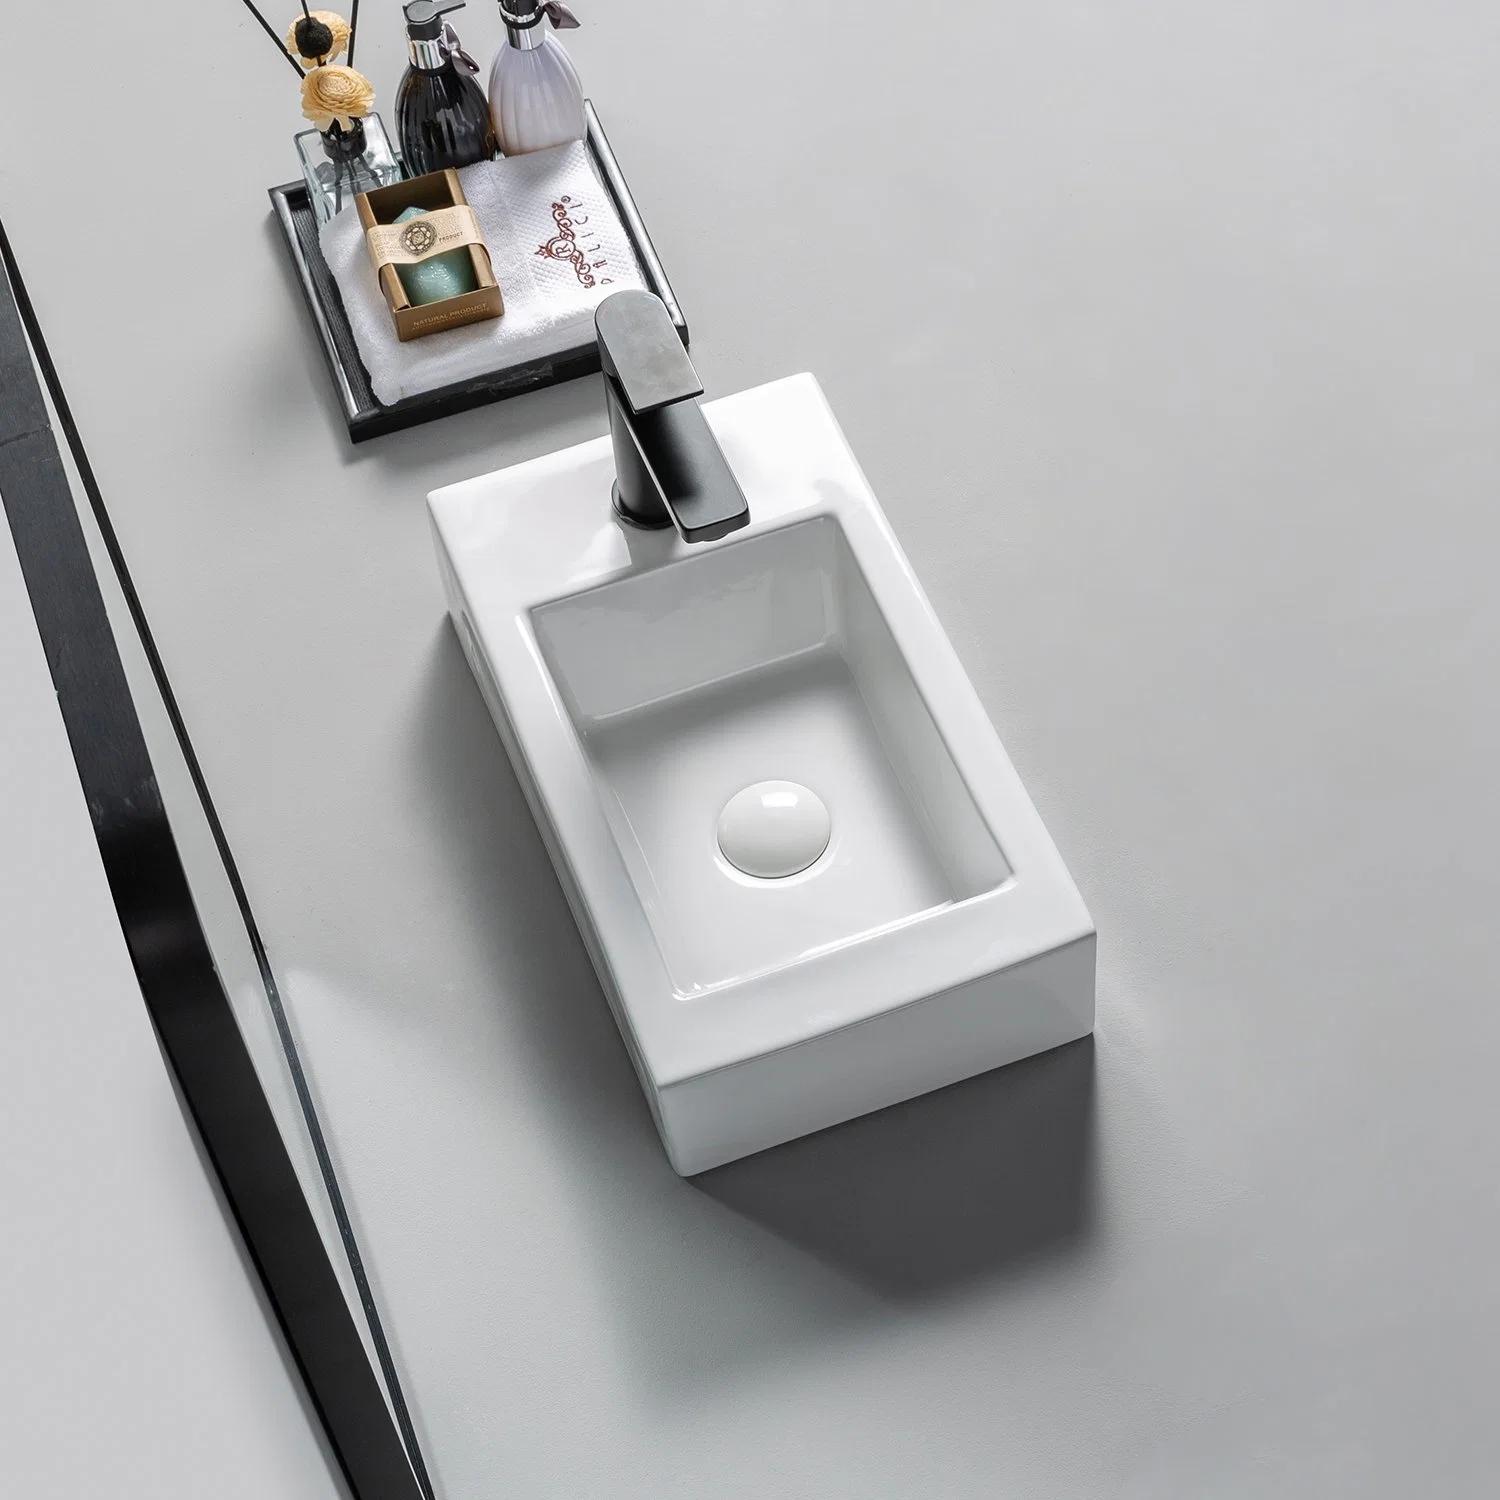 Commercial Ceramic Sanitary Ware Public Bathroom Sinks Round Shape Table Top Wash Basin for Hotel